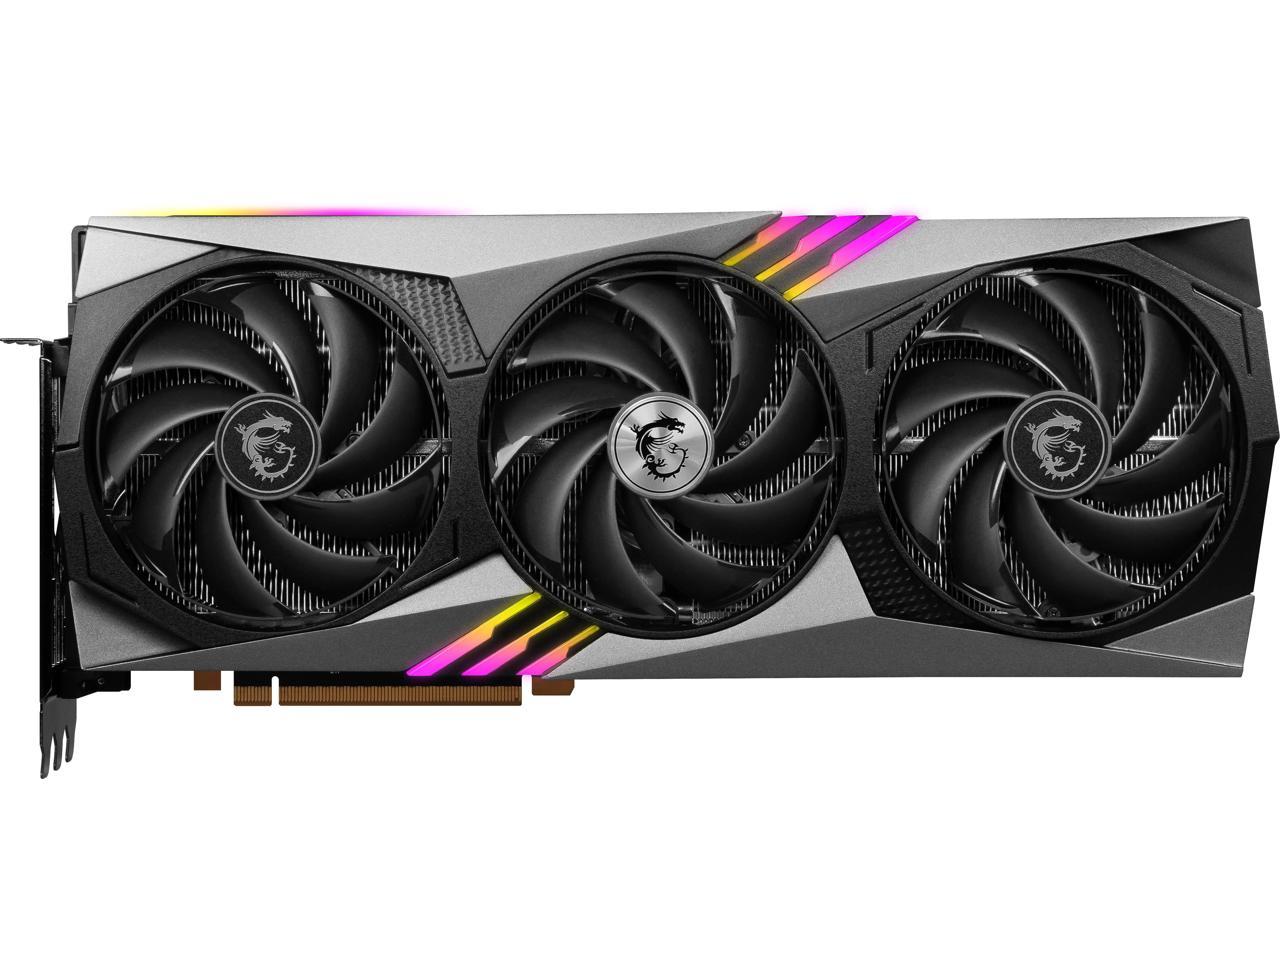 MSI GeForce RTX 4080 16GB GAMING X TRIO Graphics Card - DirectX 12 Ultimate  Supported - G-Sync Compatible - HDCP Supported - TORX Fan 5.0 Cooling  System - 16 GB GDDR6X Memory 